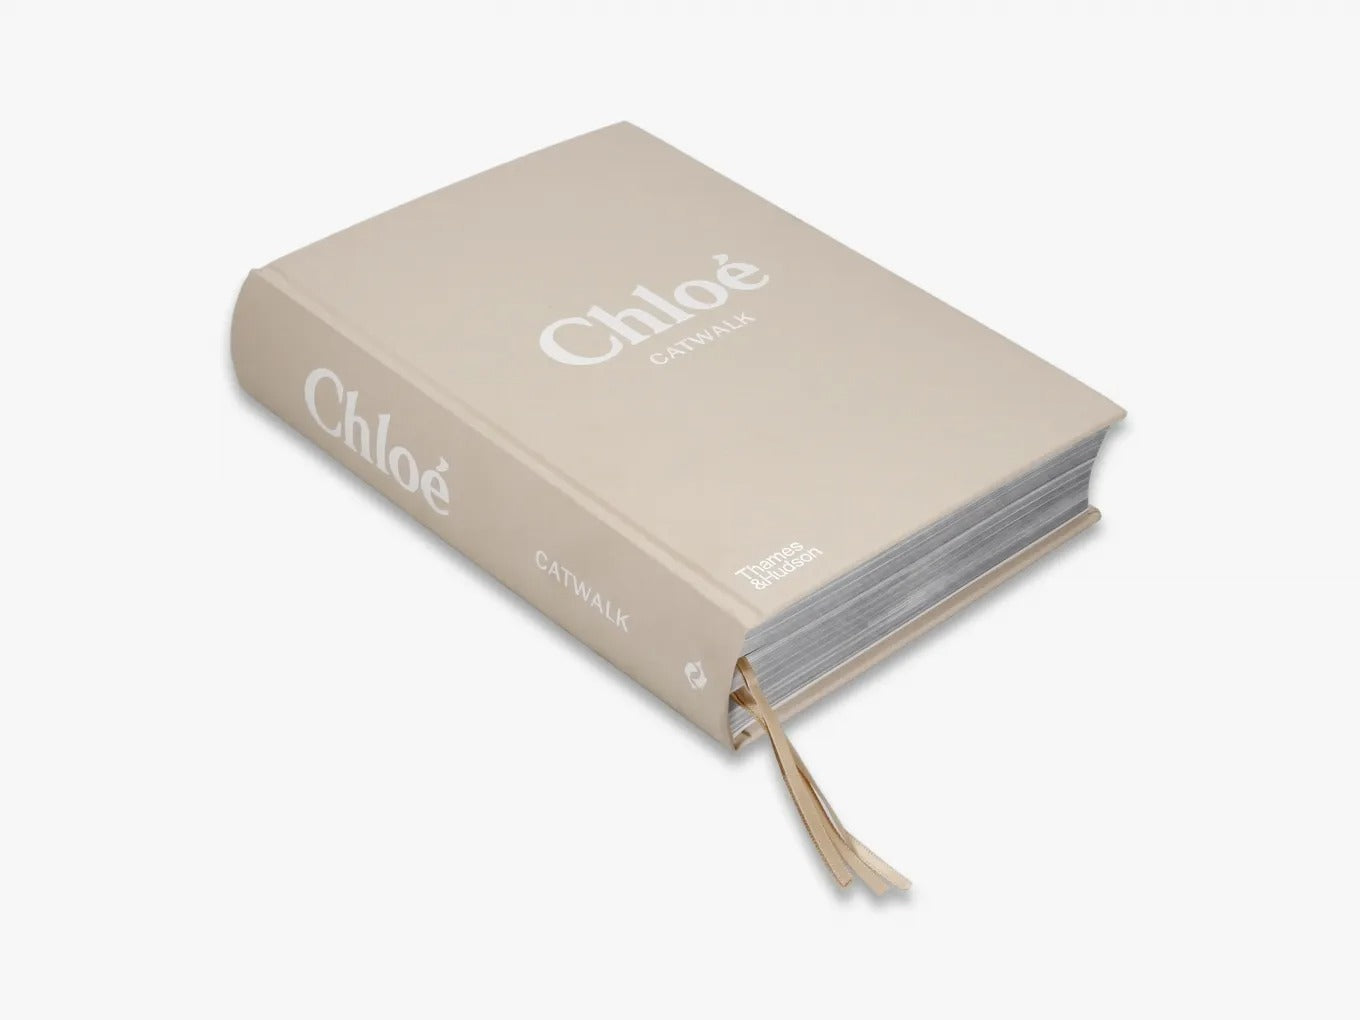 Chloé Catwalk: The Complete Collections | Creeping Fig